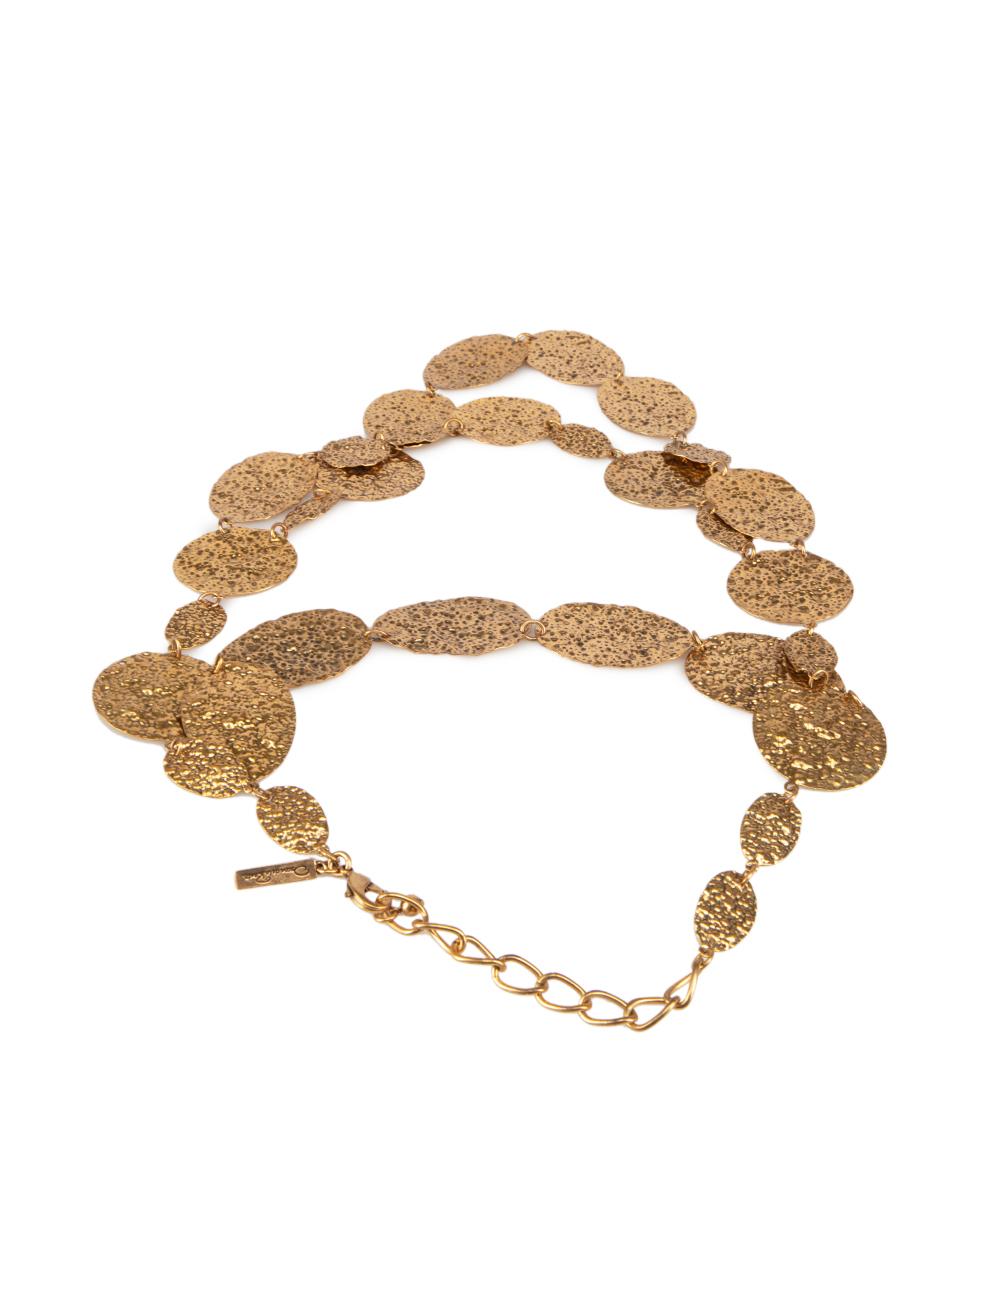 Oscar de la Renta Gold Textured Layered Necklace In Excellent Condition For Sale In London, GB